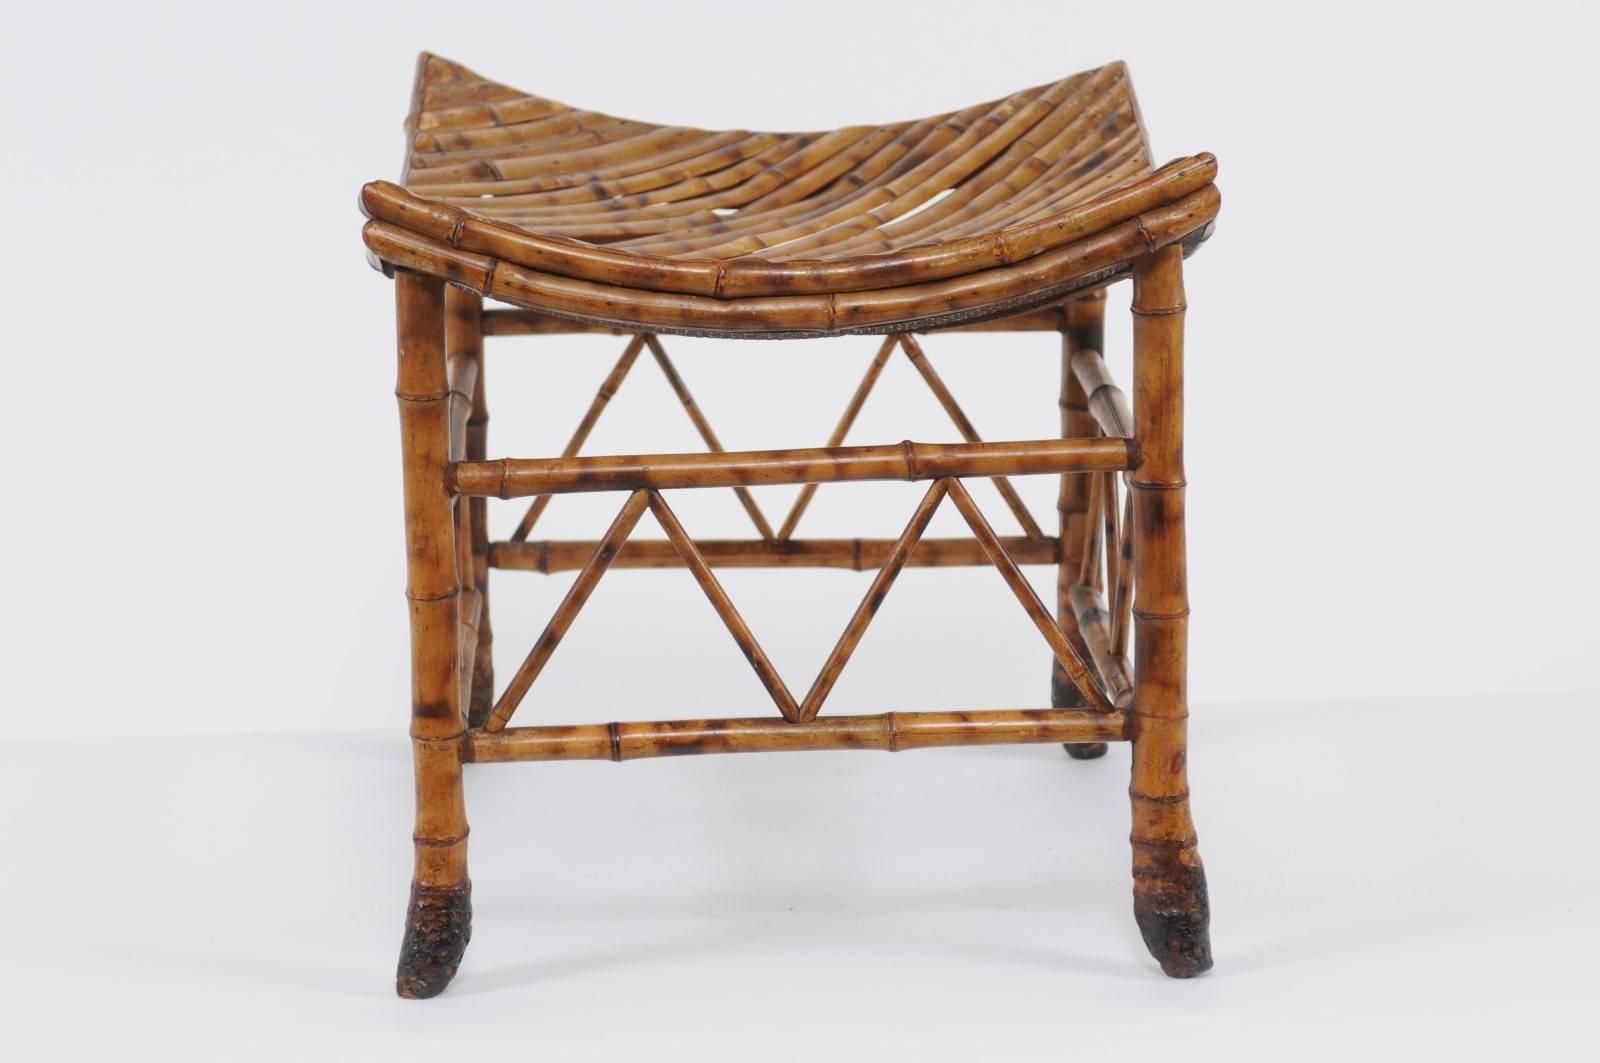 Egyptian Revival Thebes Bamboo Stool from Early 20th Century, England 1